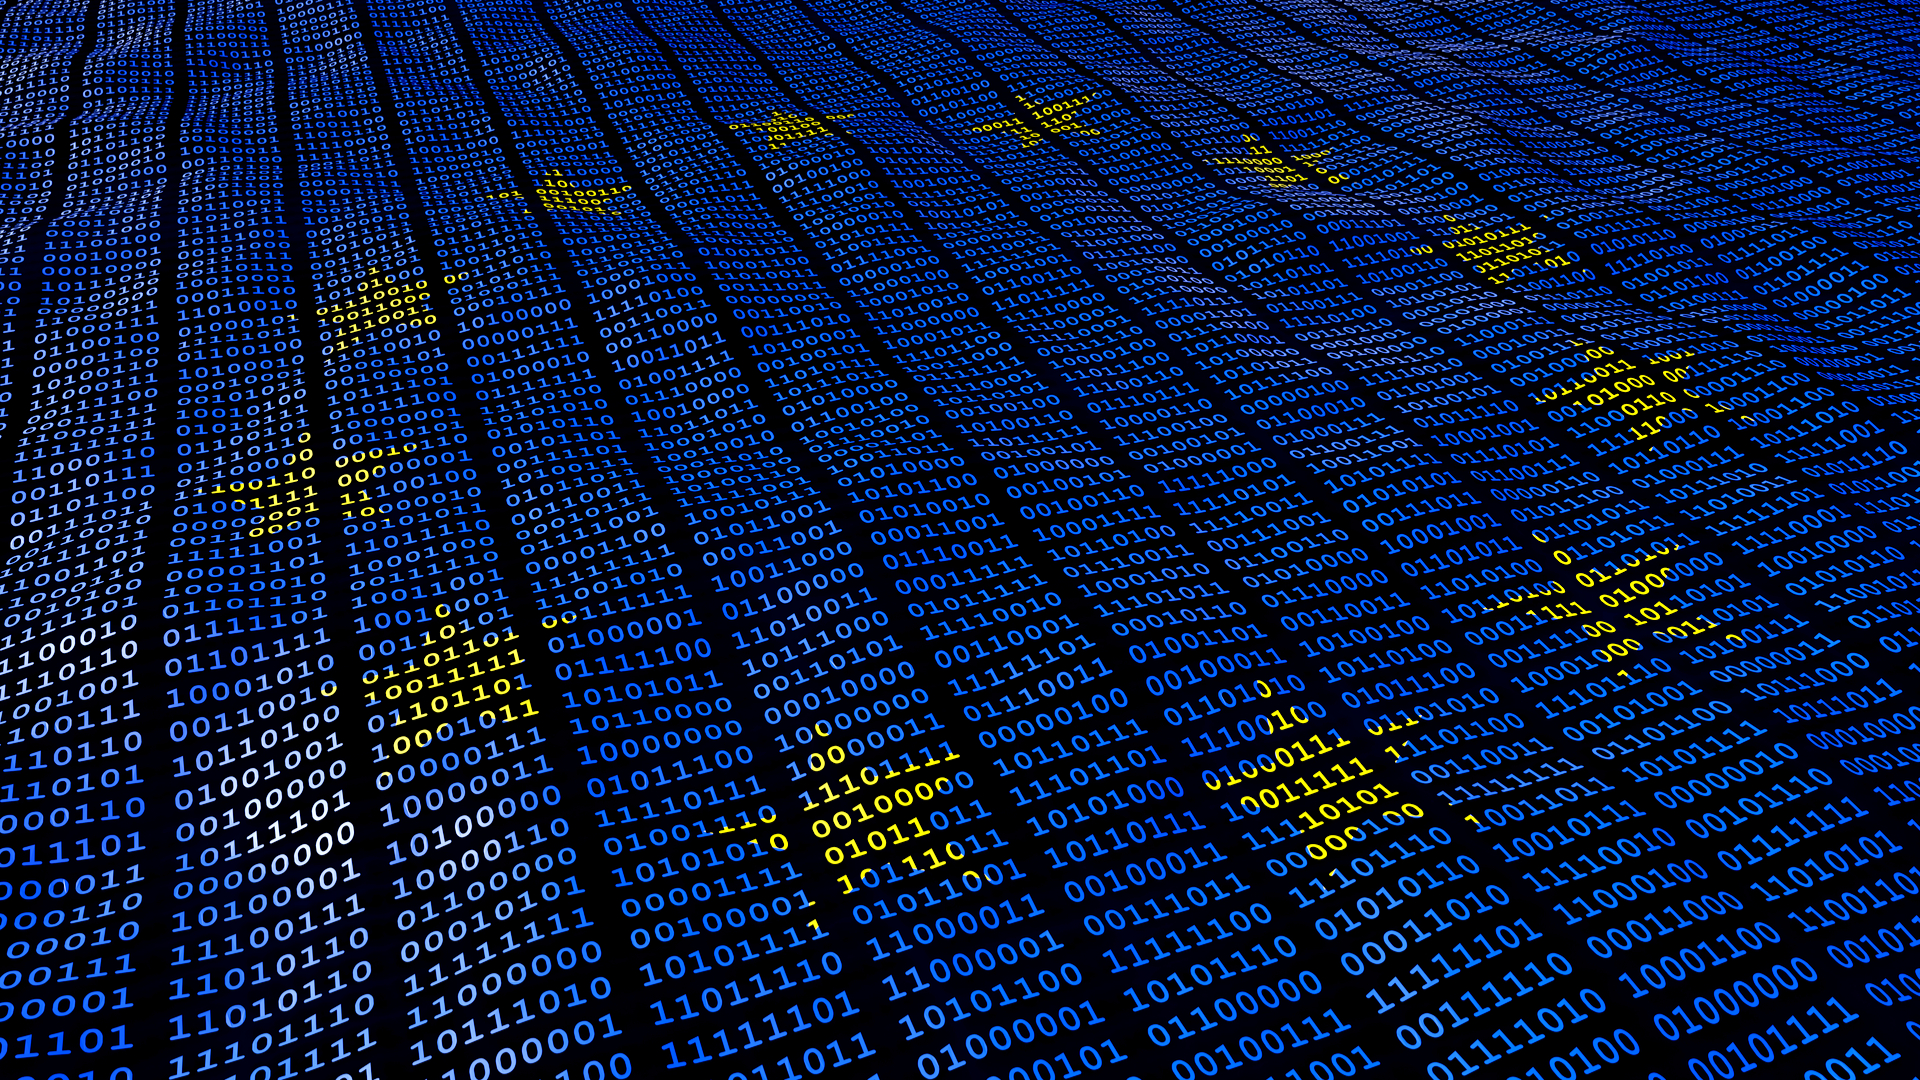 GDPR depicted by binary code in a European flag formation